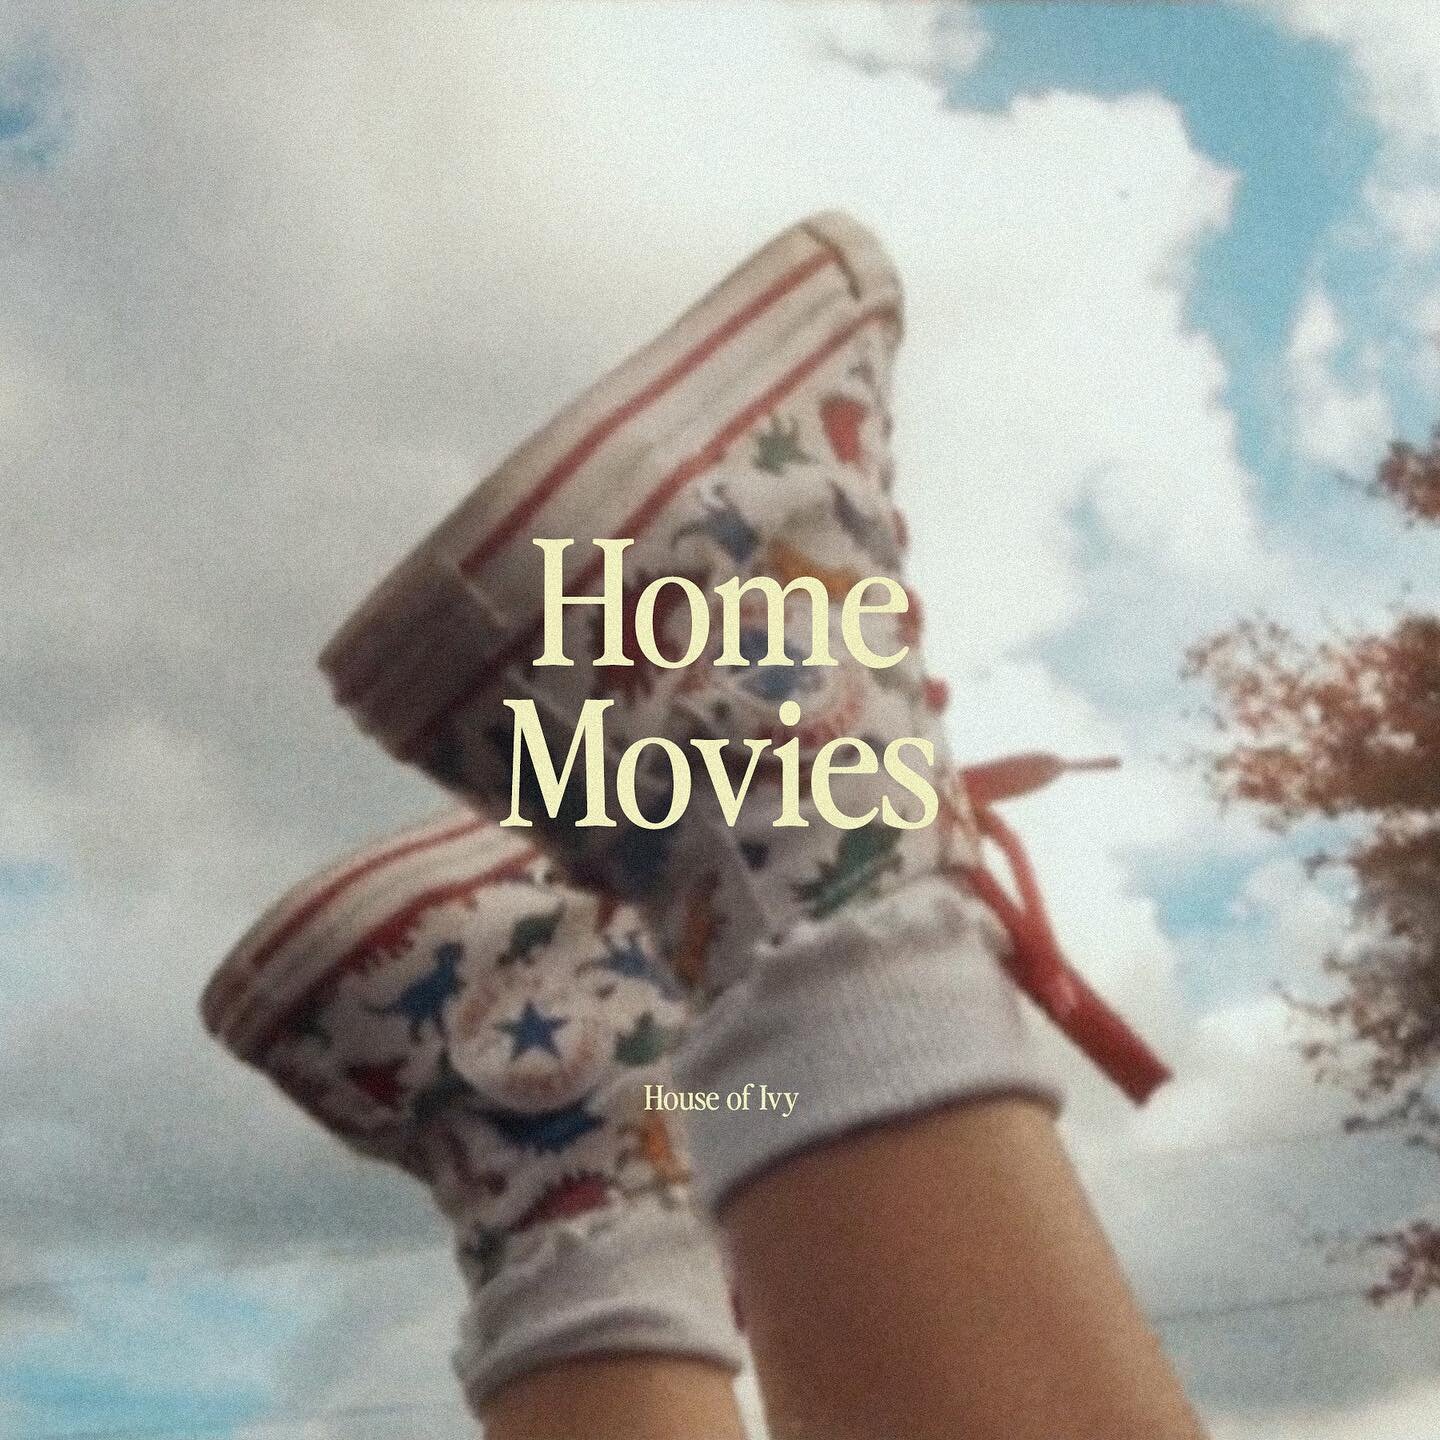 The home movie is here 🎞️ I am now officially offering these as a service and I could not be more excited ☻ I am so in love with moving memories!! First video example is my Super 8 style, and second is VHS.

A friend once told me that my films remin